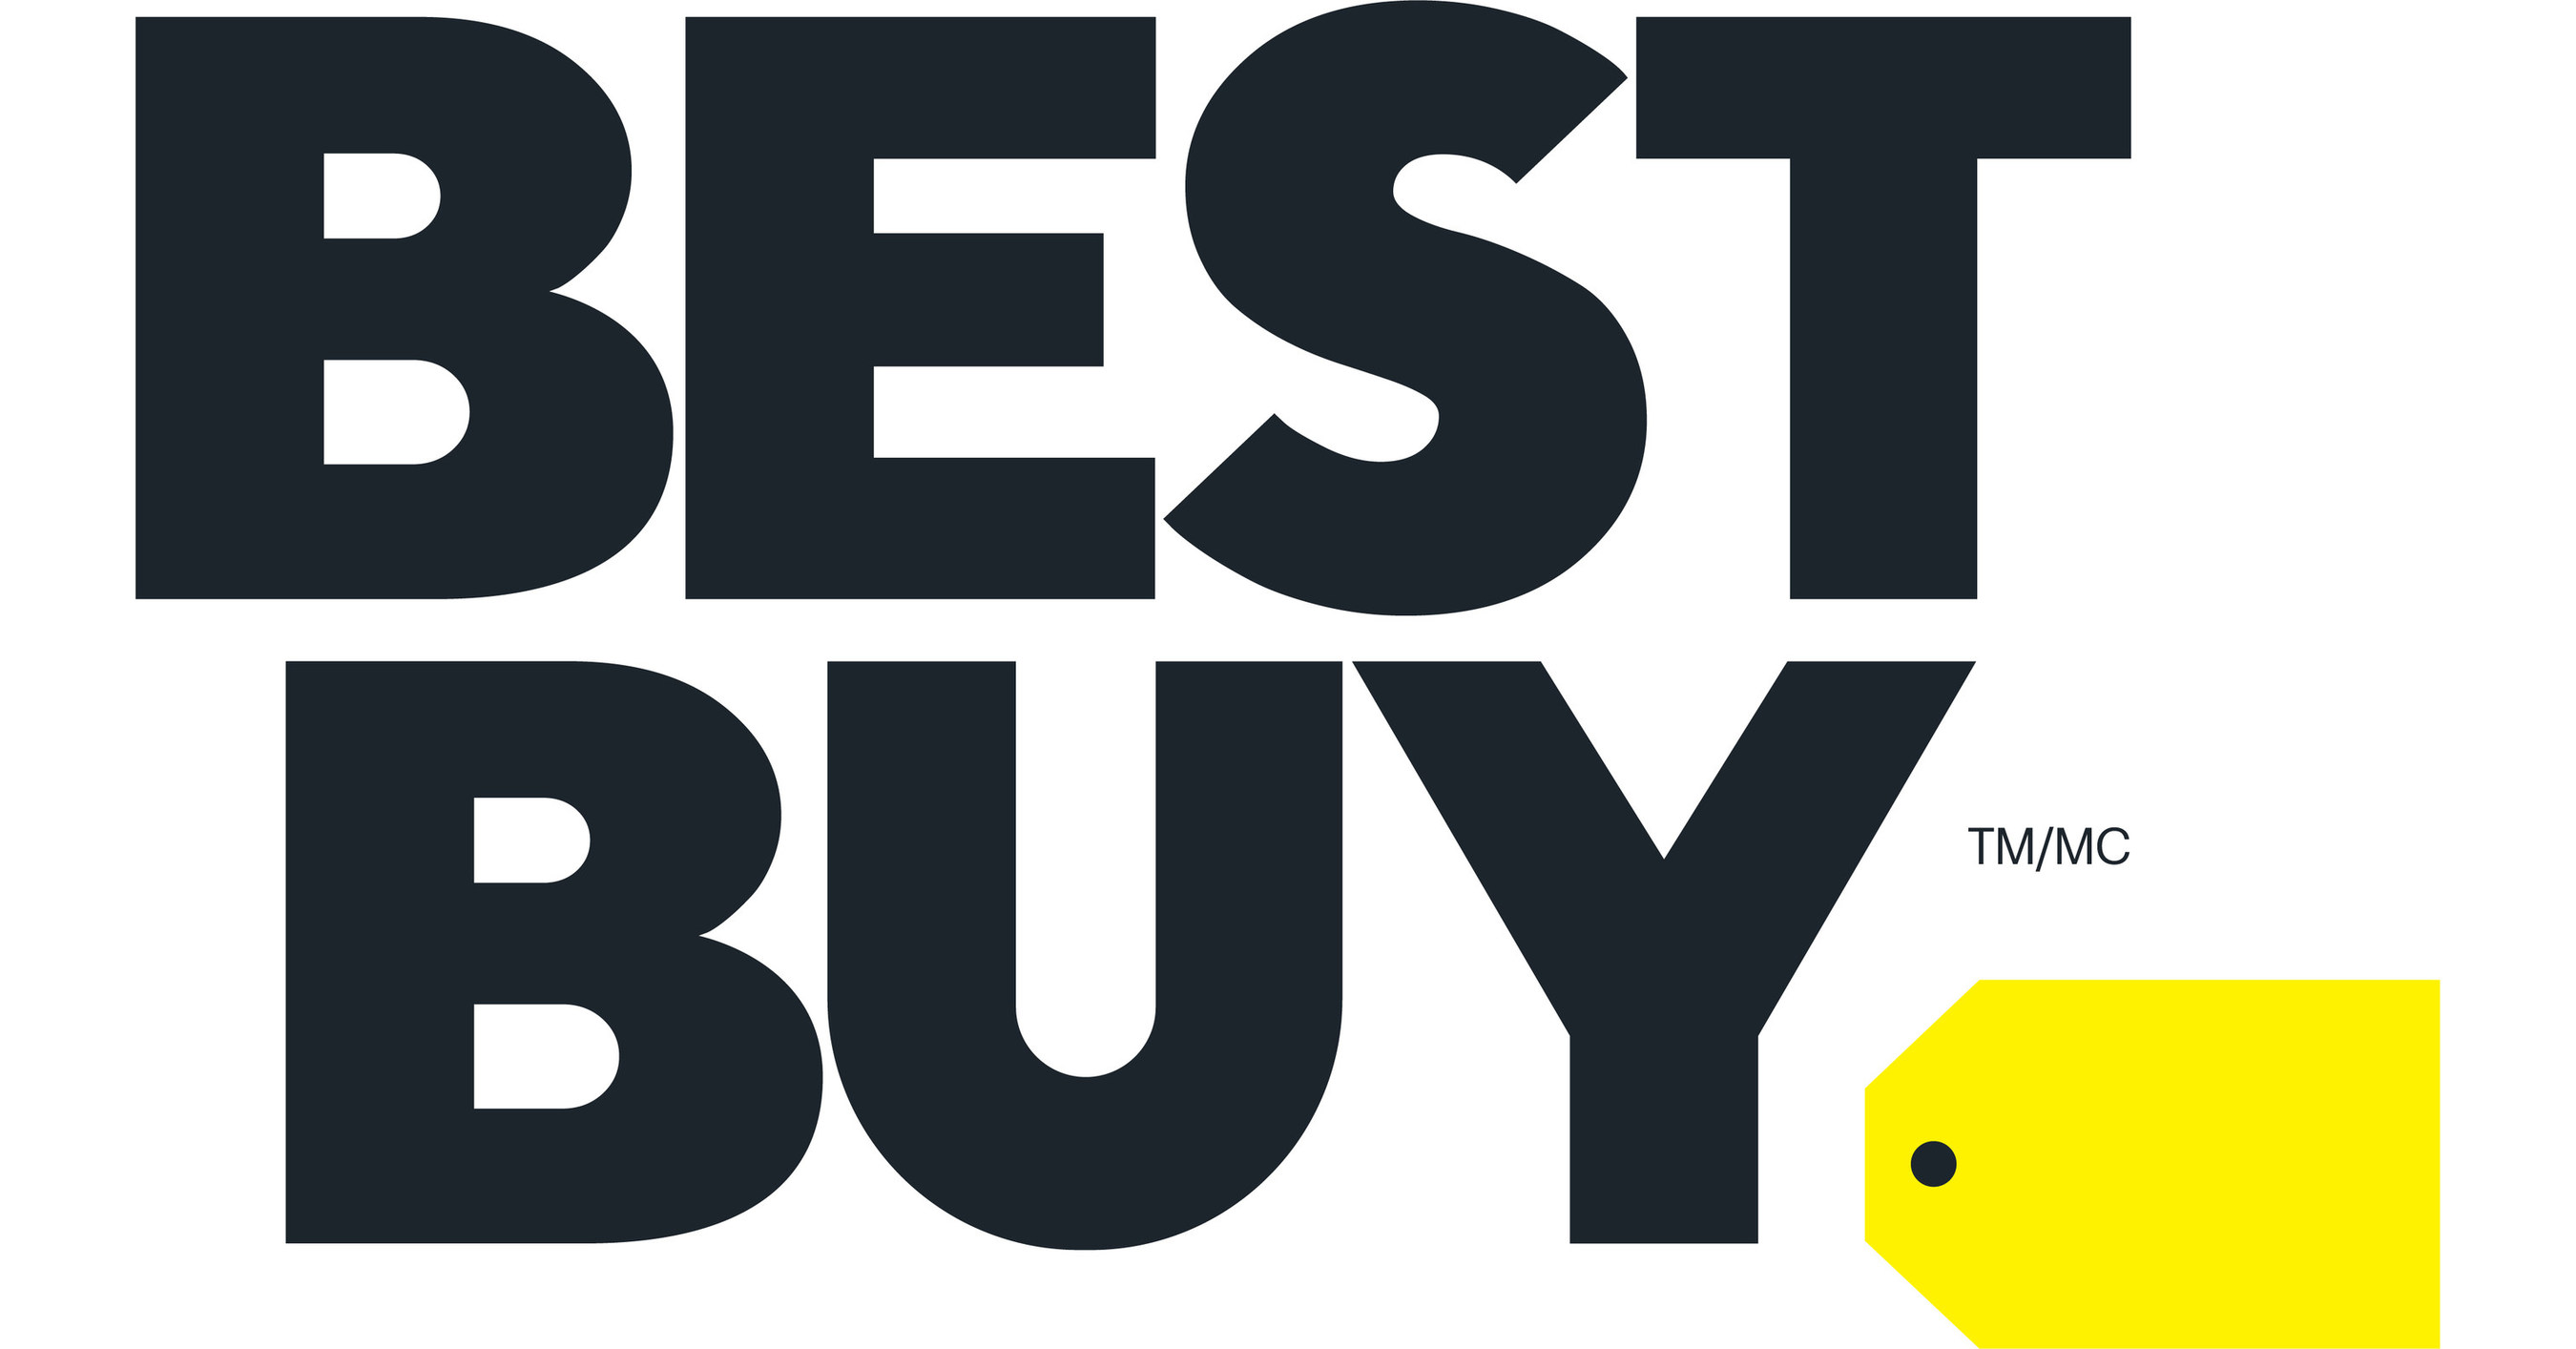 Best Buy Canada to Open its Doors Early for Black Friday